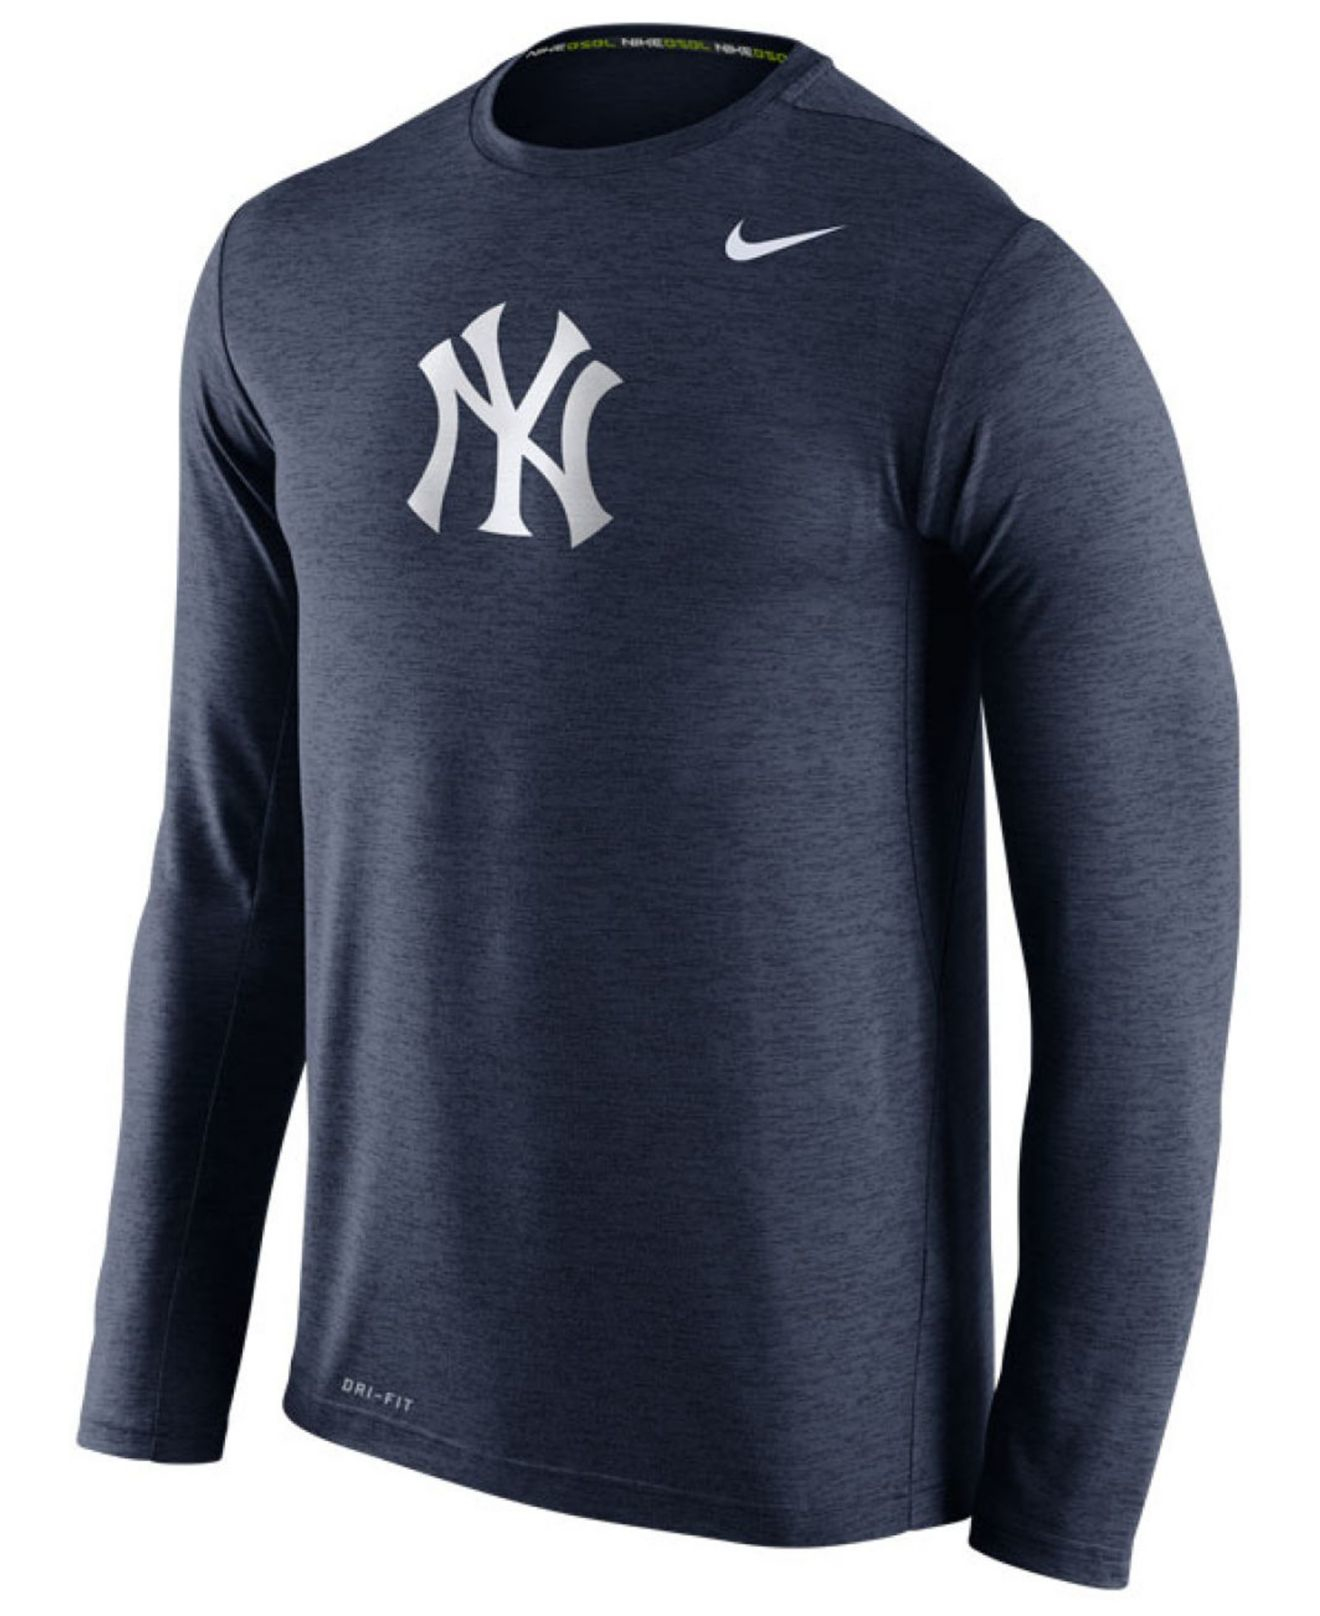 Lyst - Nike Men's Long-sleeve New York Yankees Dri-fit Touch T-shirt in ...